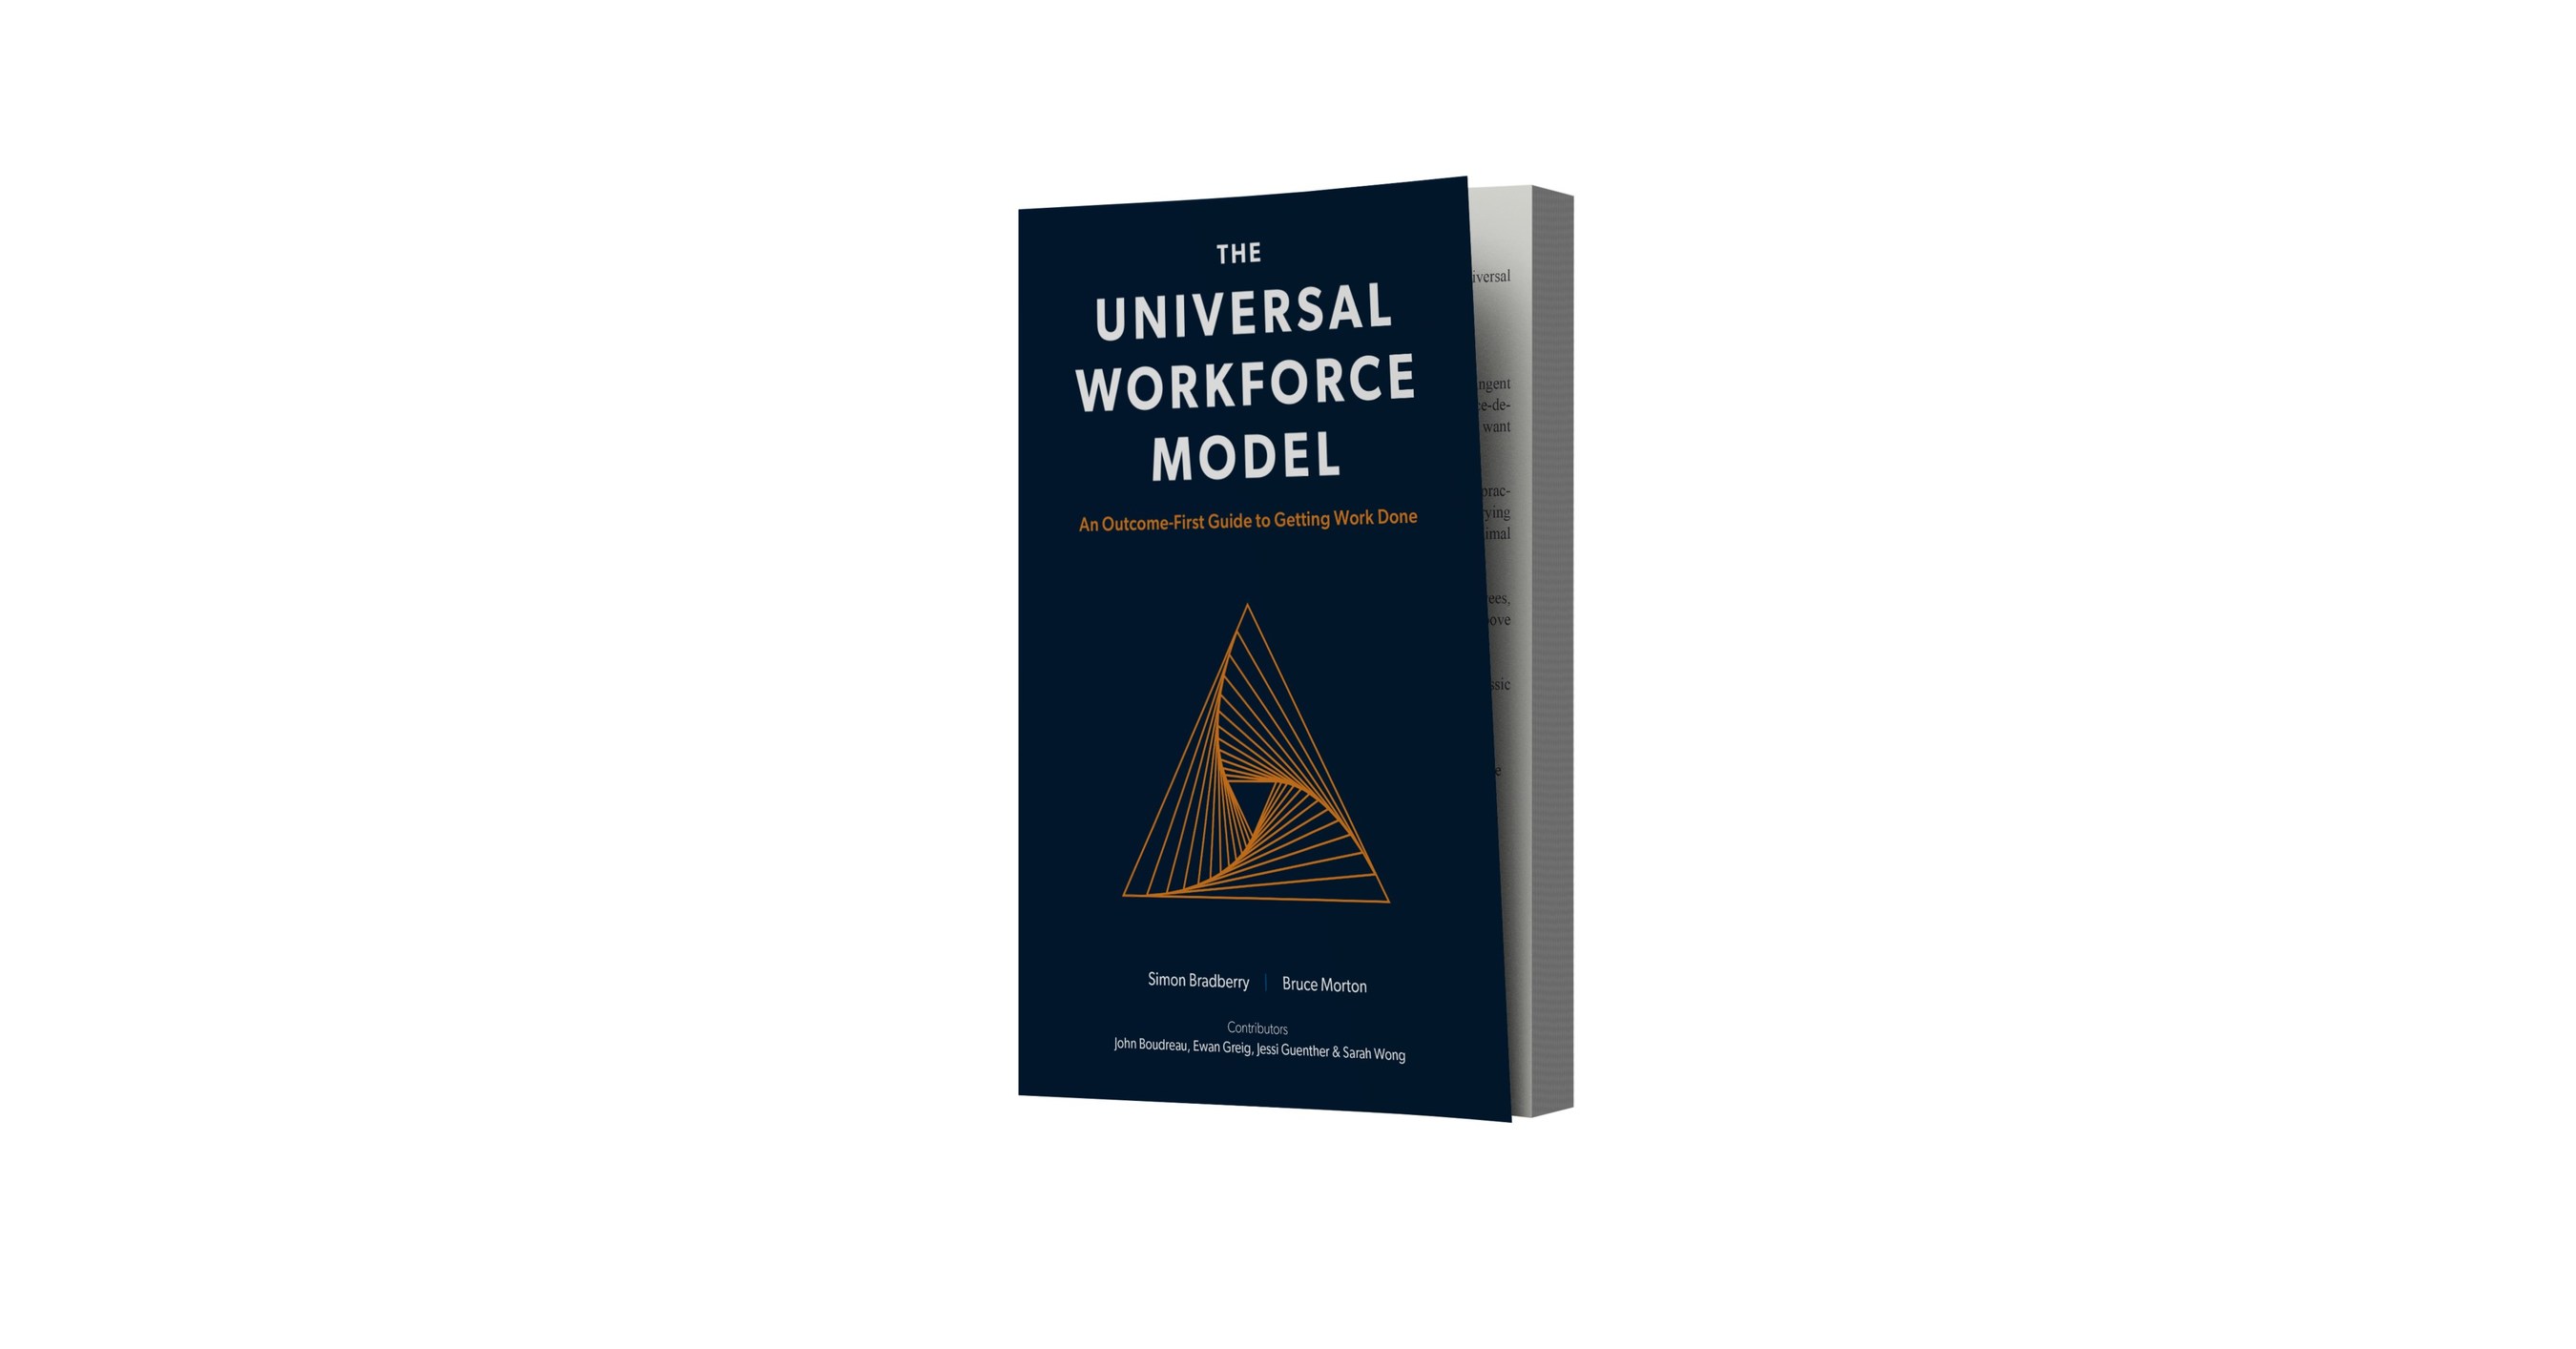 Allegis Global Solutions Launches The Universal Workforce Model With a New Book